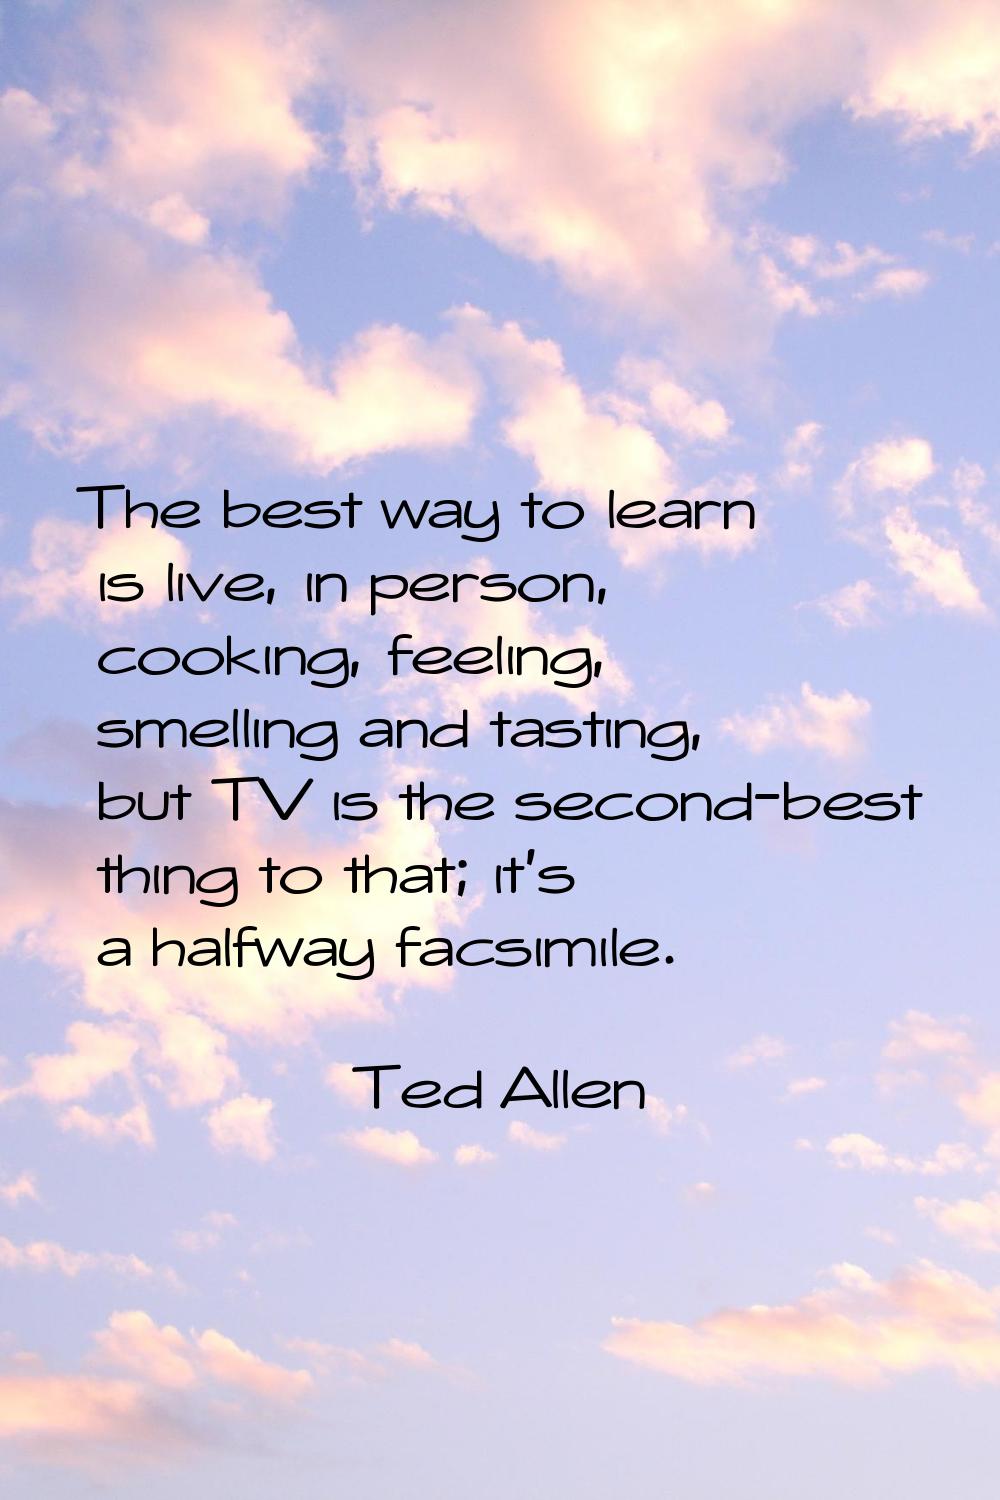 The best way to learn is live, in person, cooking, feeling, smelling and tasting, but TV is the sec